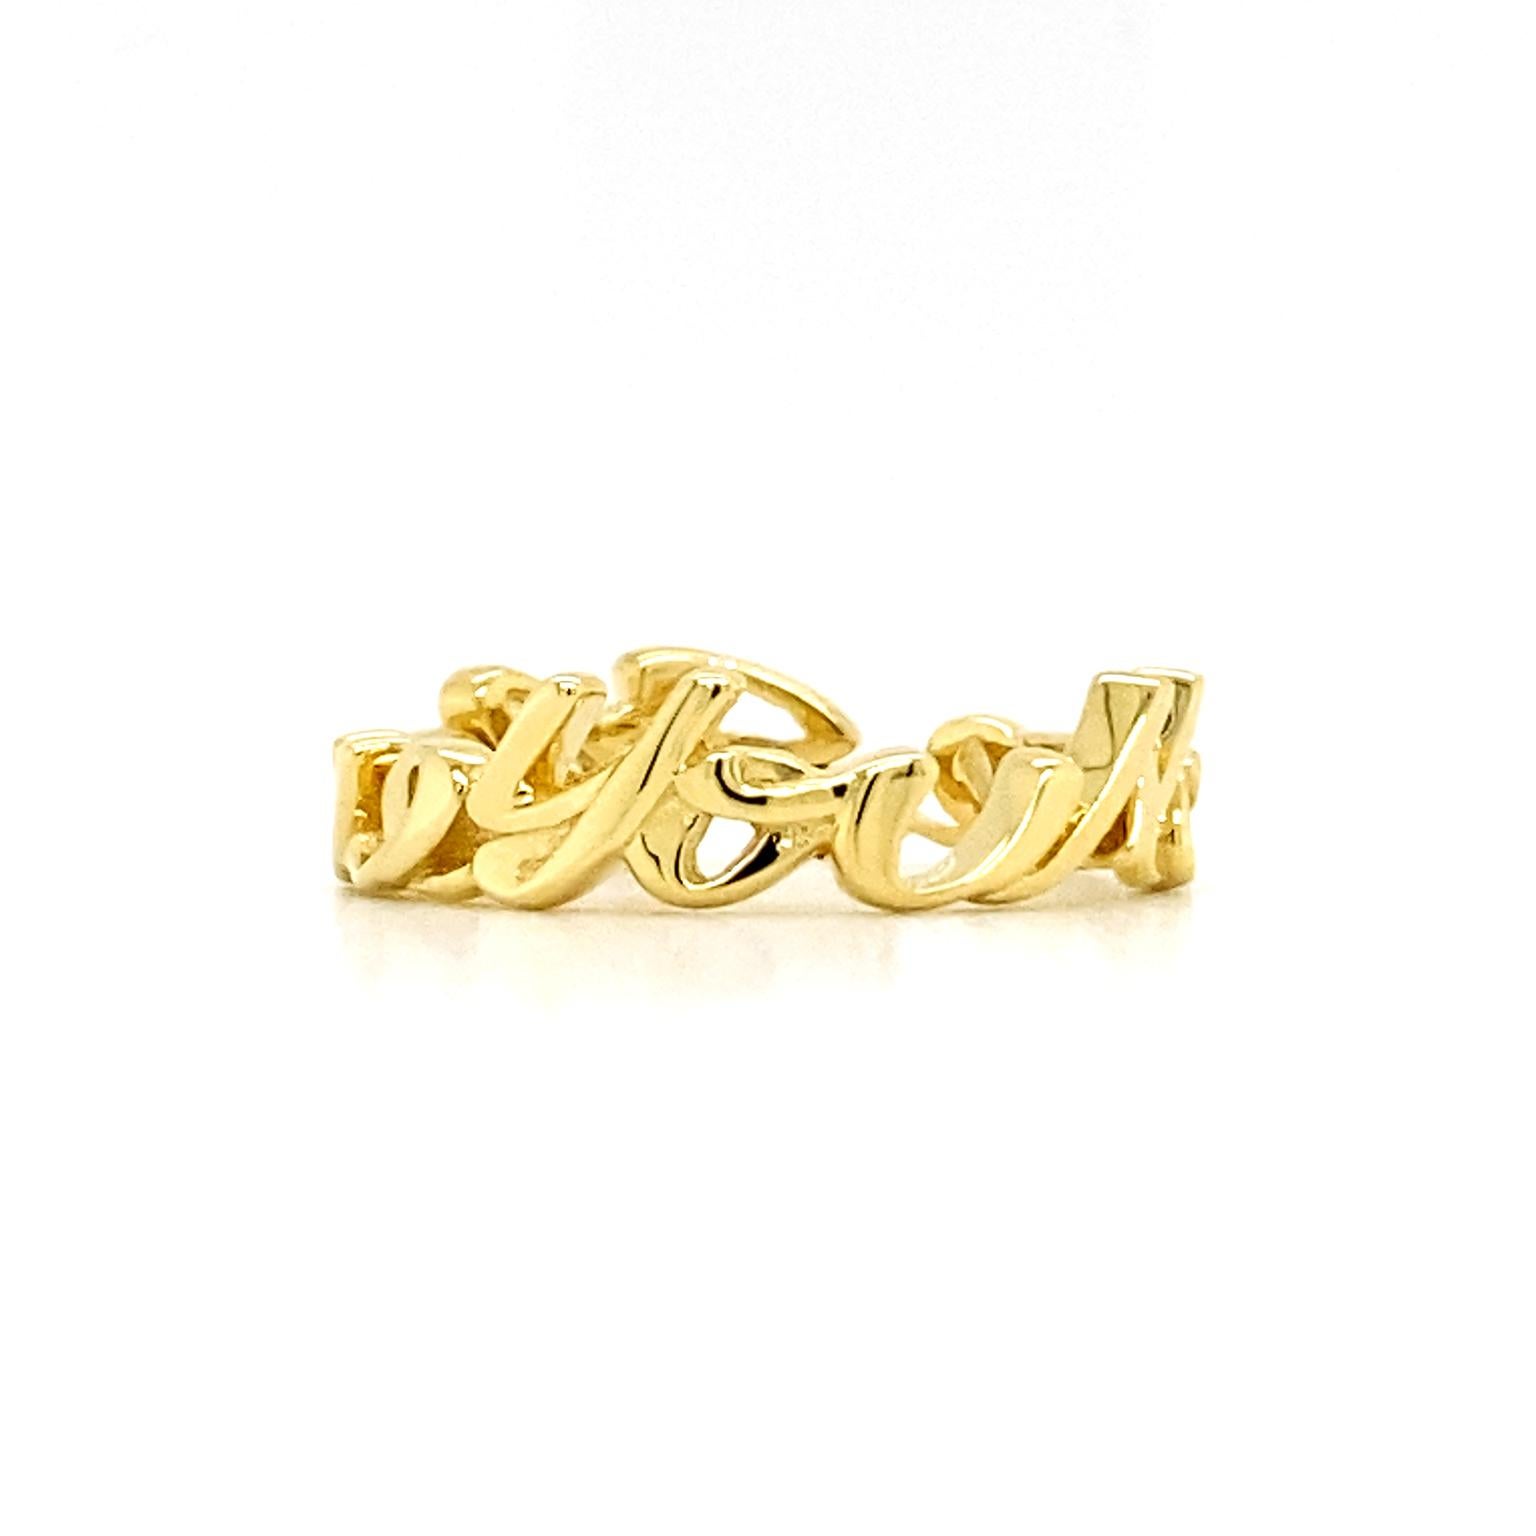 Valentin Magro I Love You More Ring - Script - 5mm is made of romance. The material of choice is 18k yellow gold with a glossy finish. It’s shaped into 5mm tall letters, creating the phrase 'I love you more.' The message’s cursive nature allows the